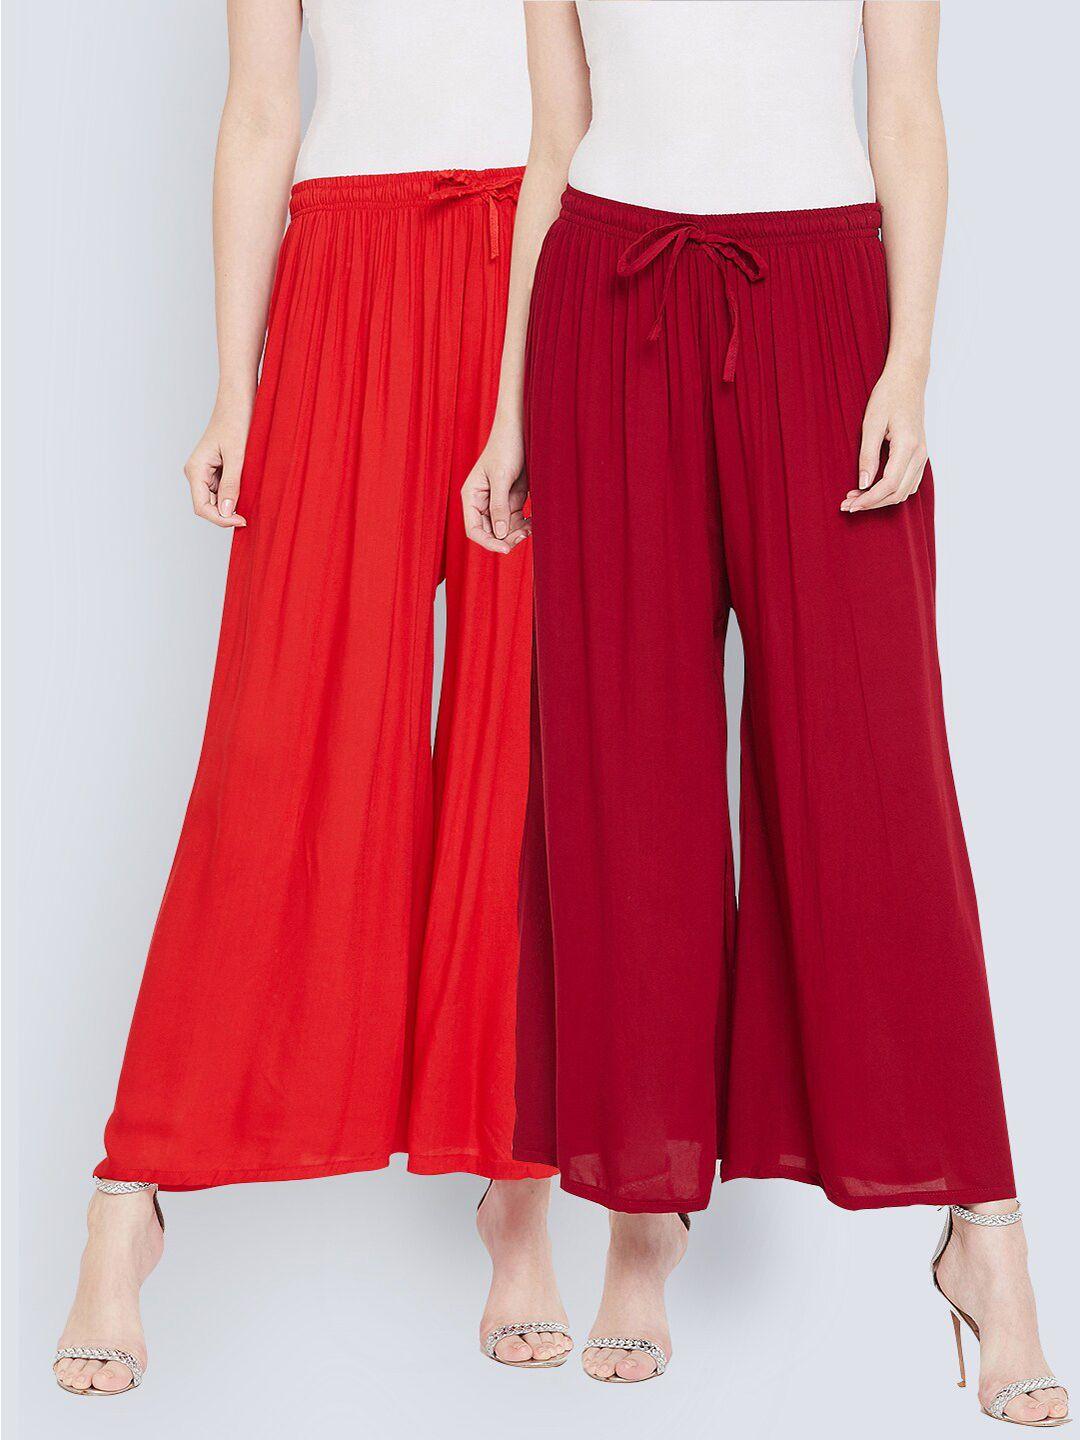 castle women pack of 2 maroon & red flared ethnic palazzos